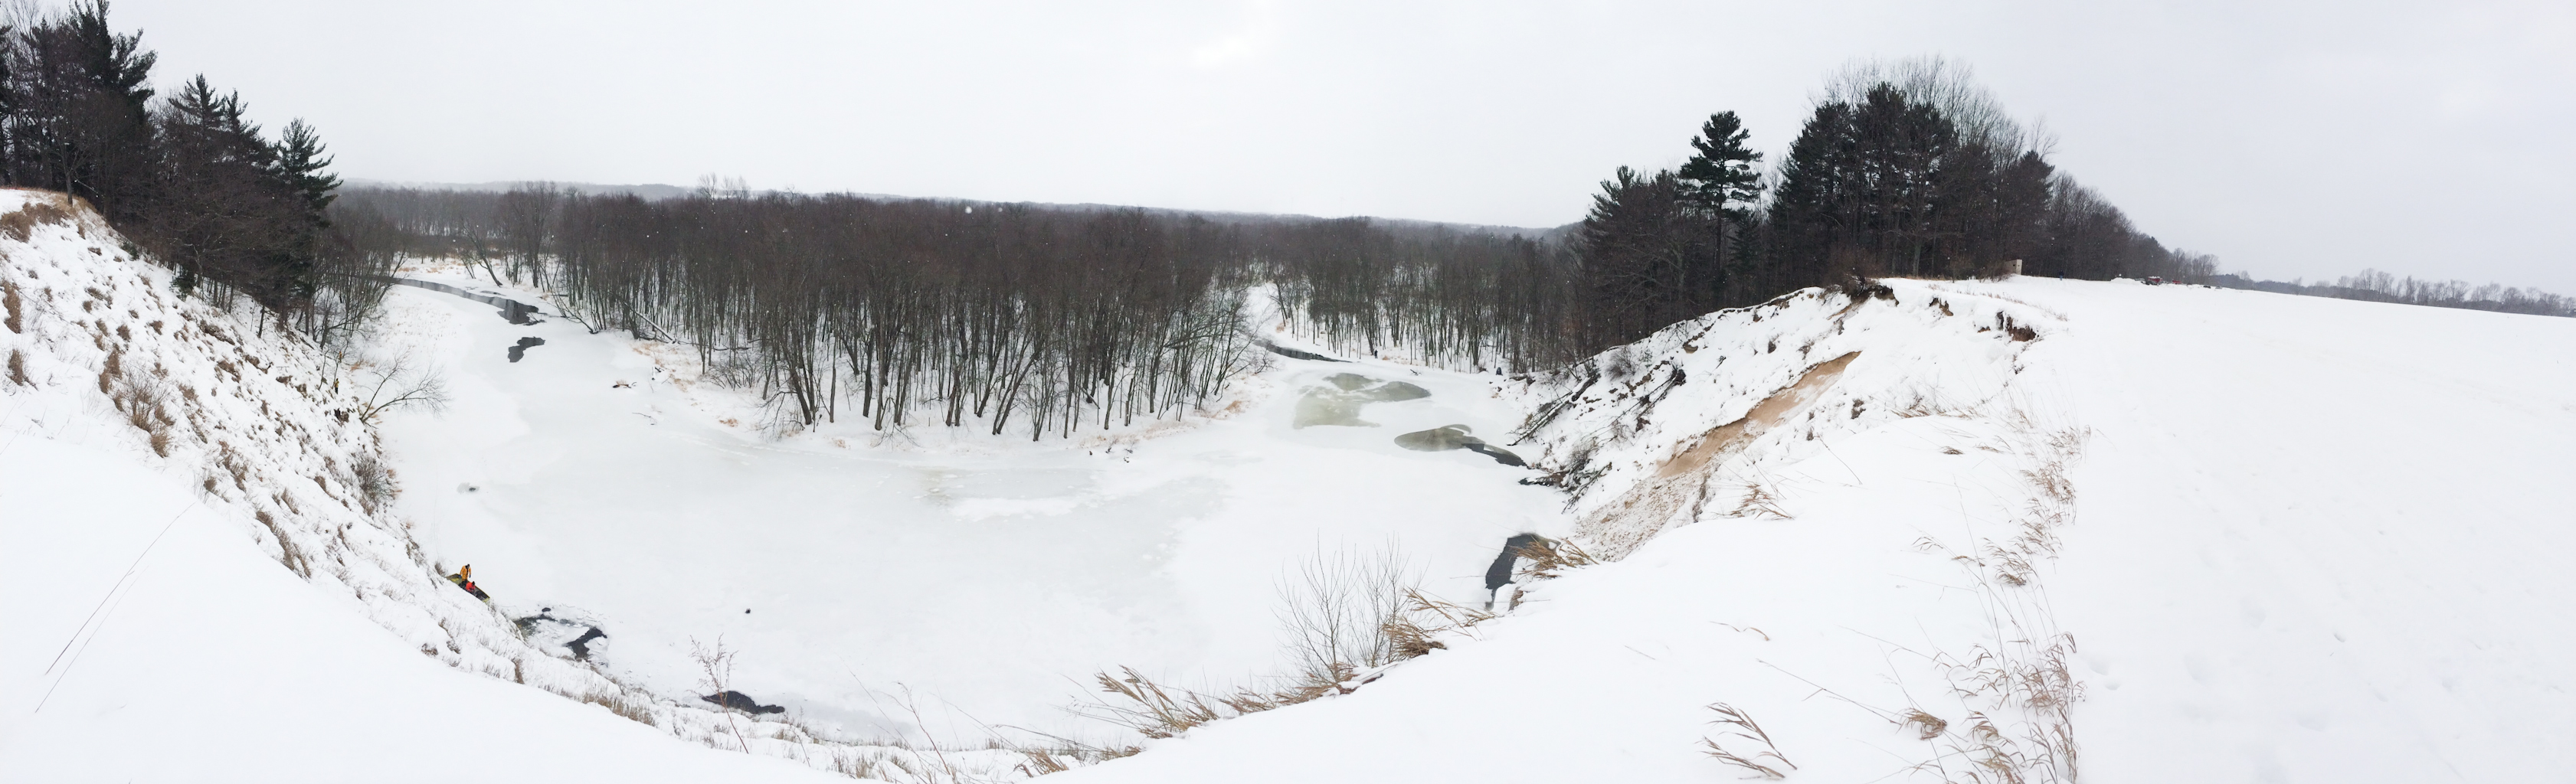 Snowmobiler’s body recovered from river